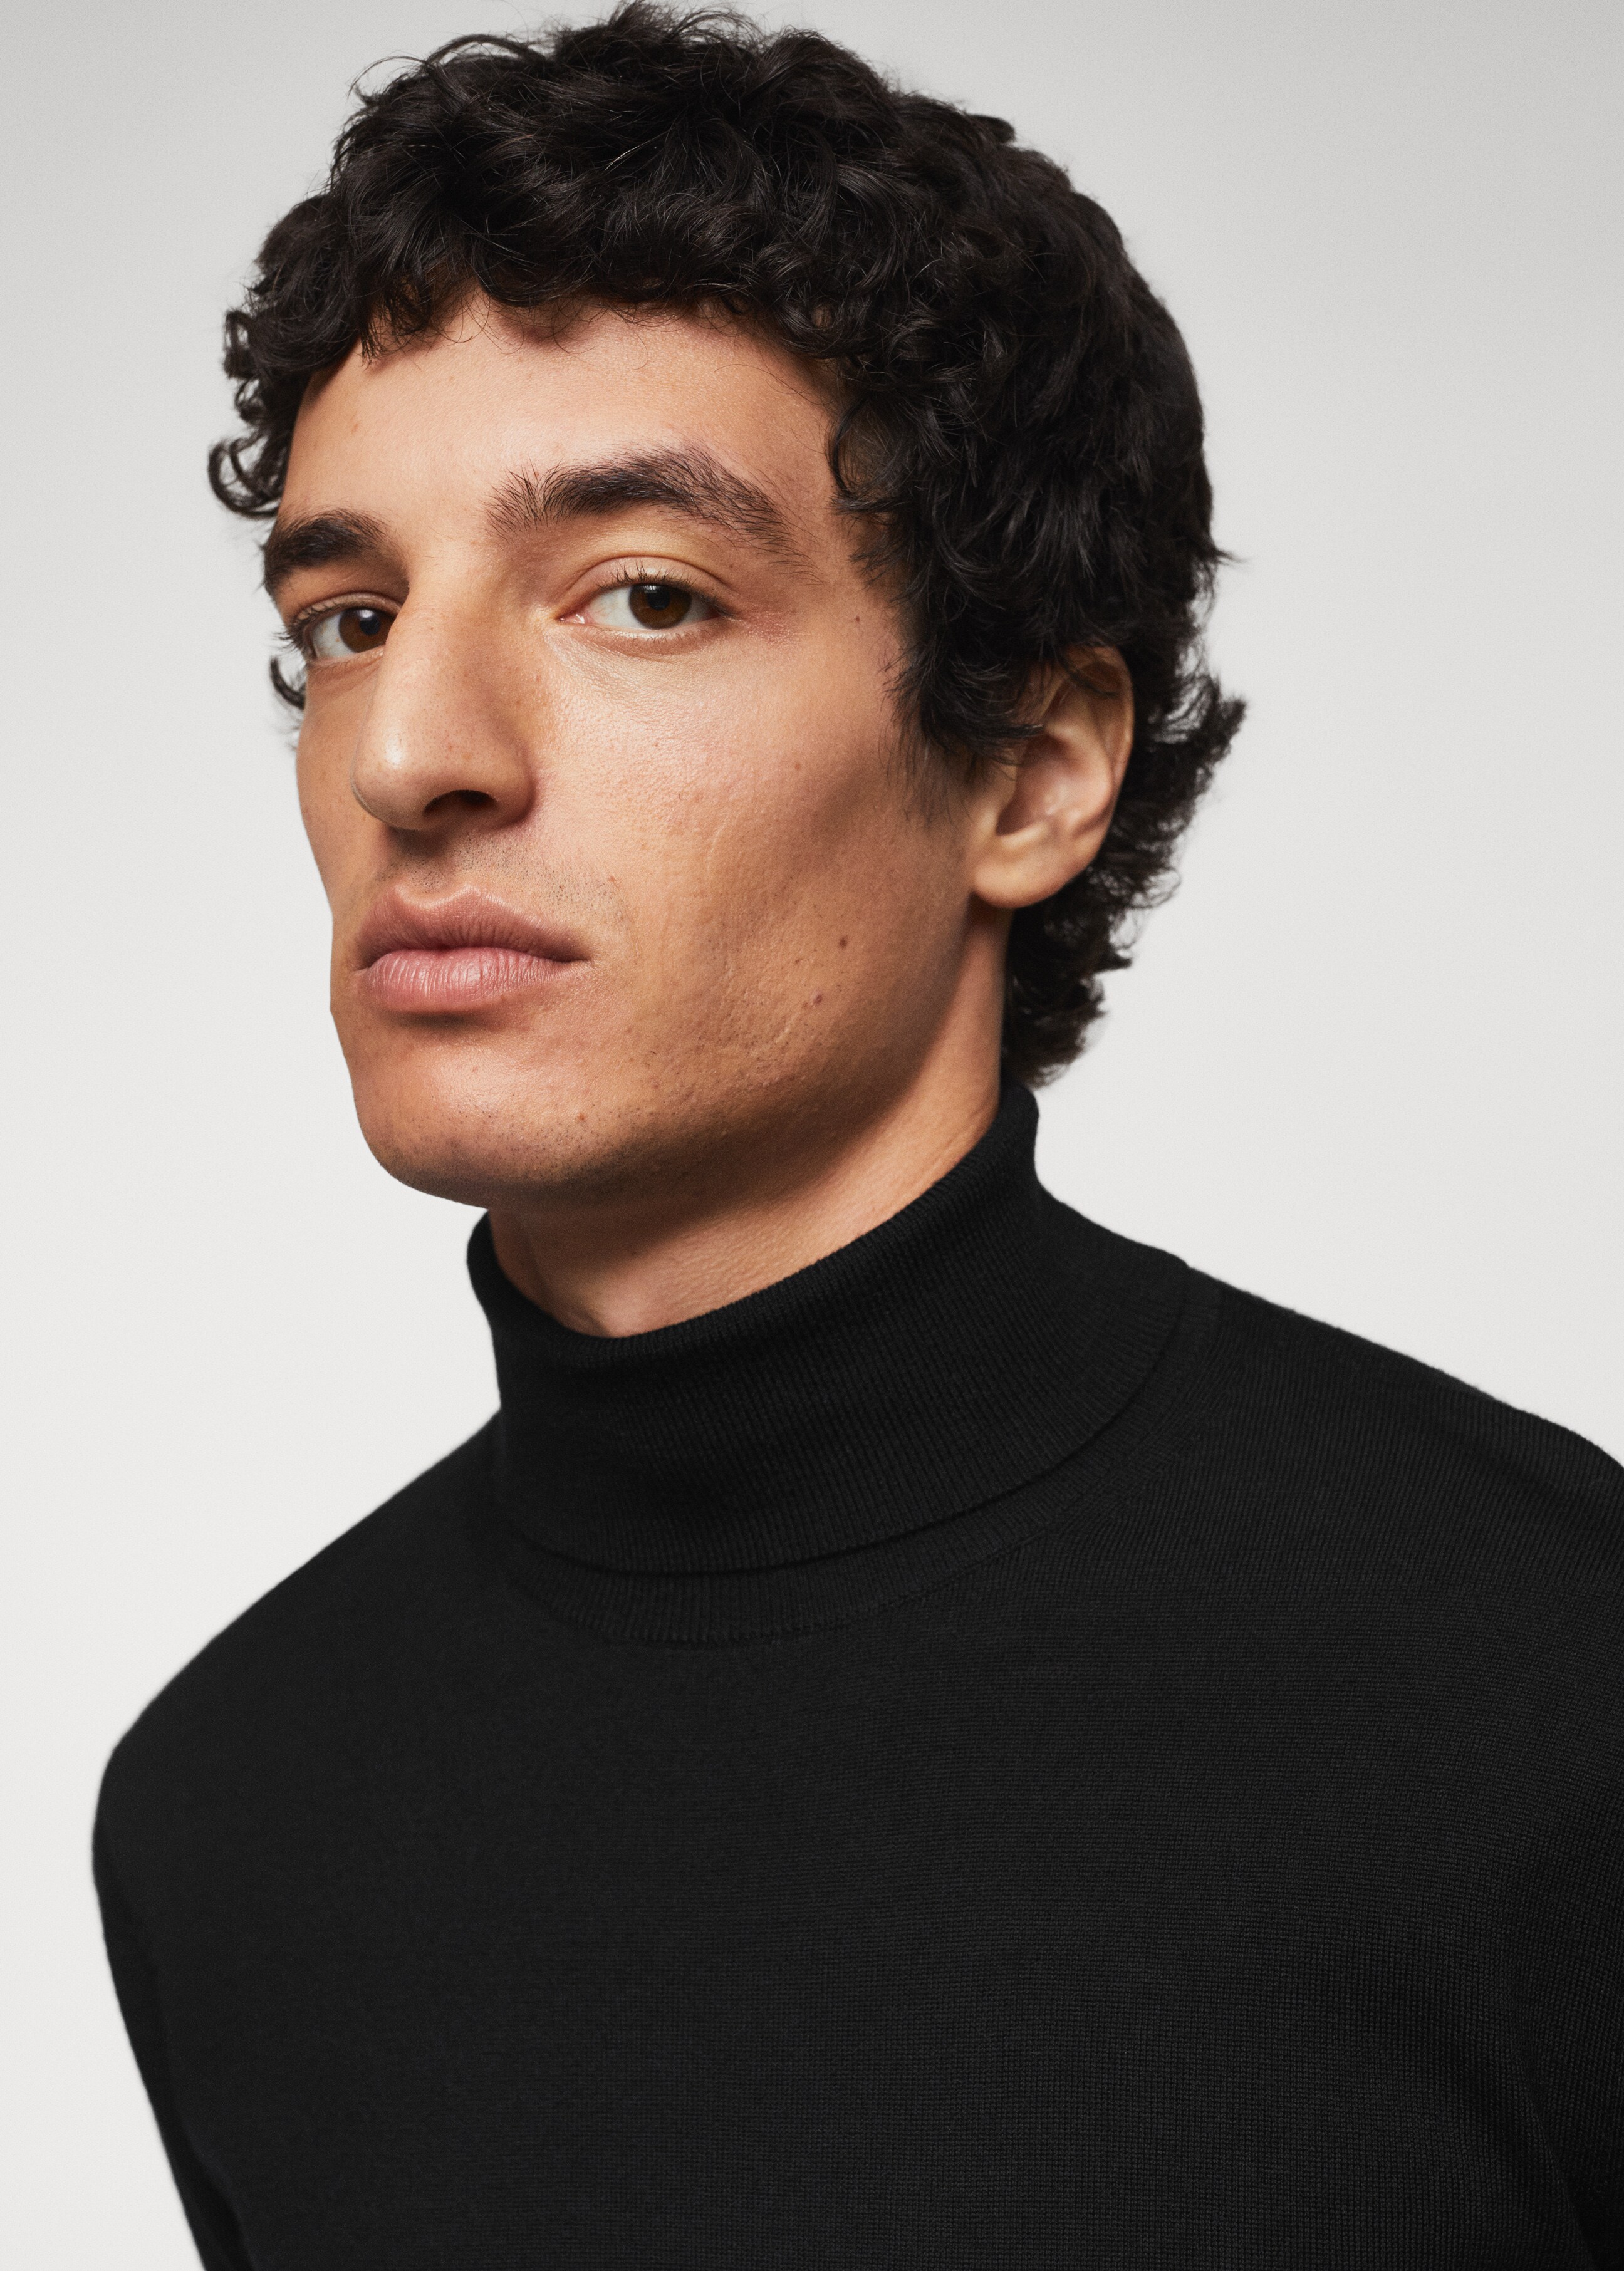 Turtleneck wool sweater - Details of the article 1